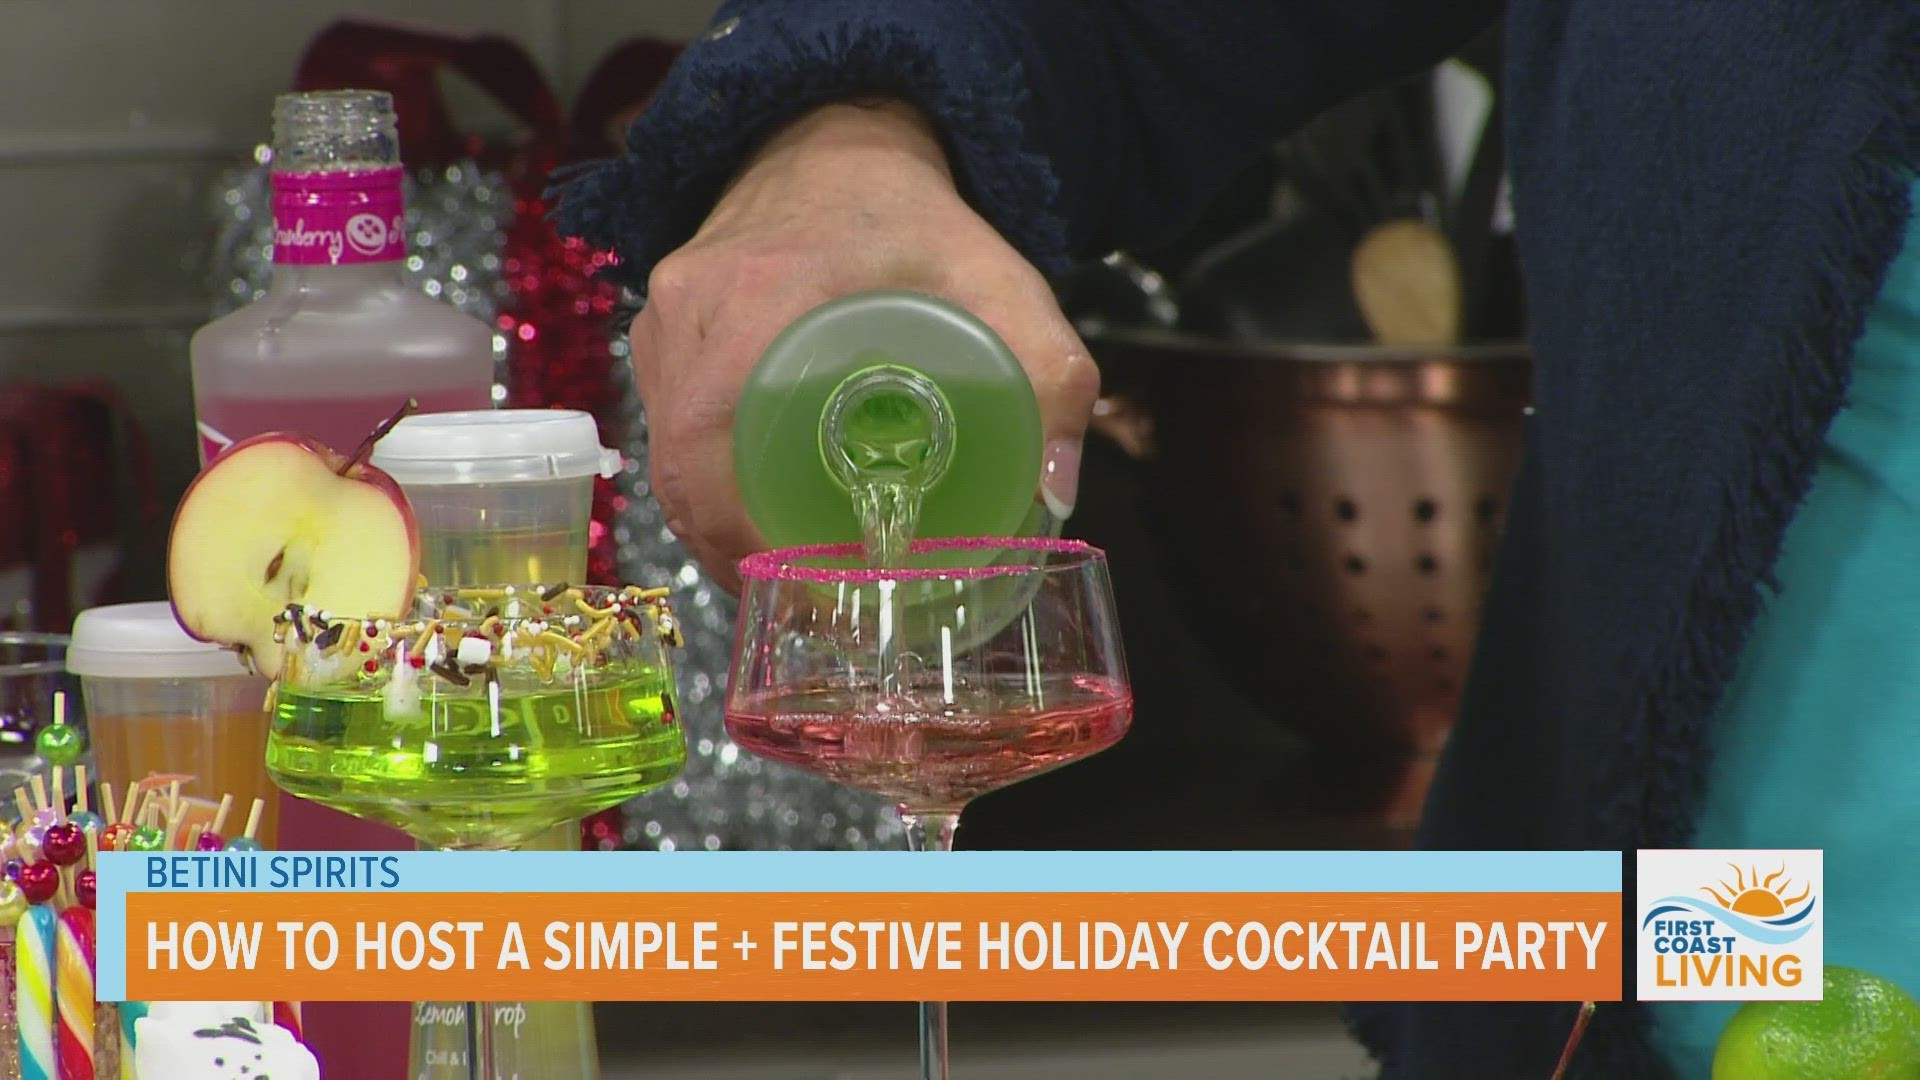 How to host a simple & festive holiday cocktail party with Betini Spirits.